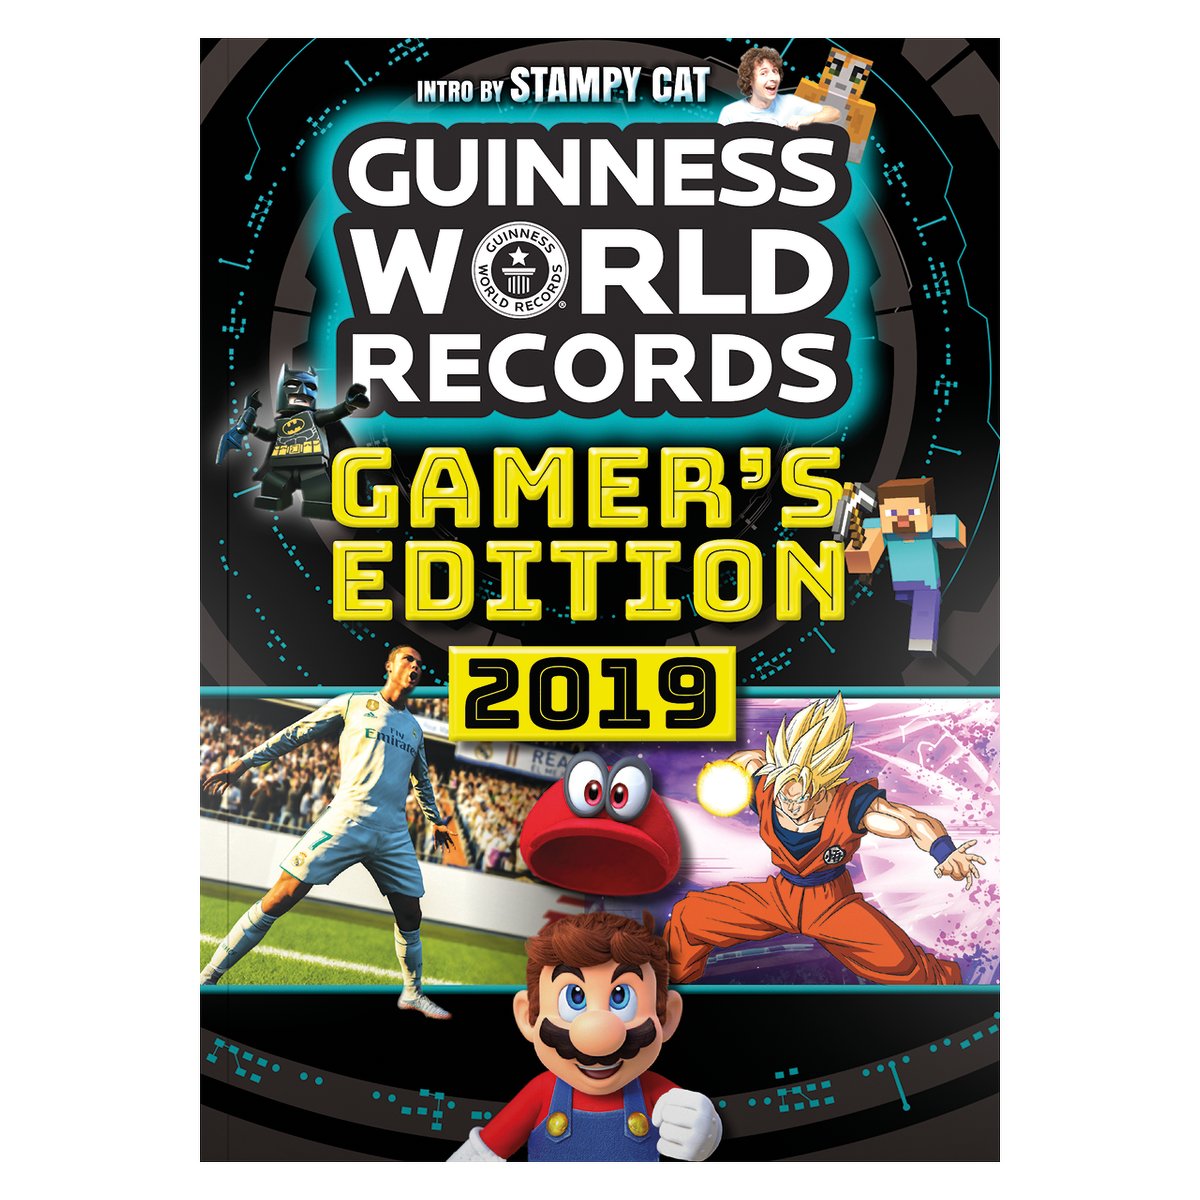 Easy to understand Thoughtful bomb The Guinness World Records Store - Guinness World Records 2019: Gamer's  Edition